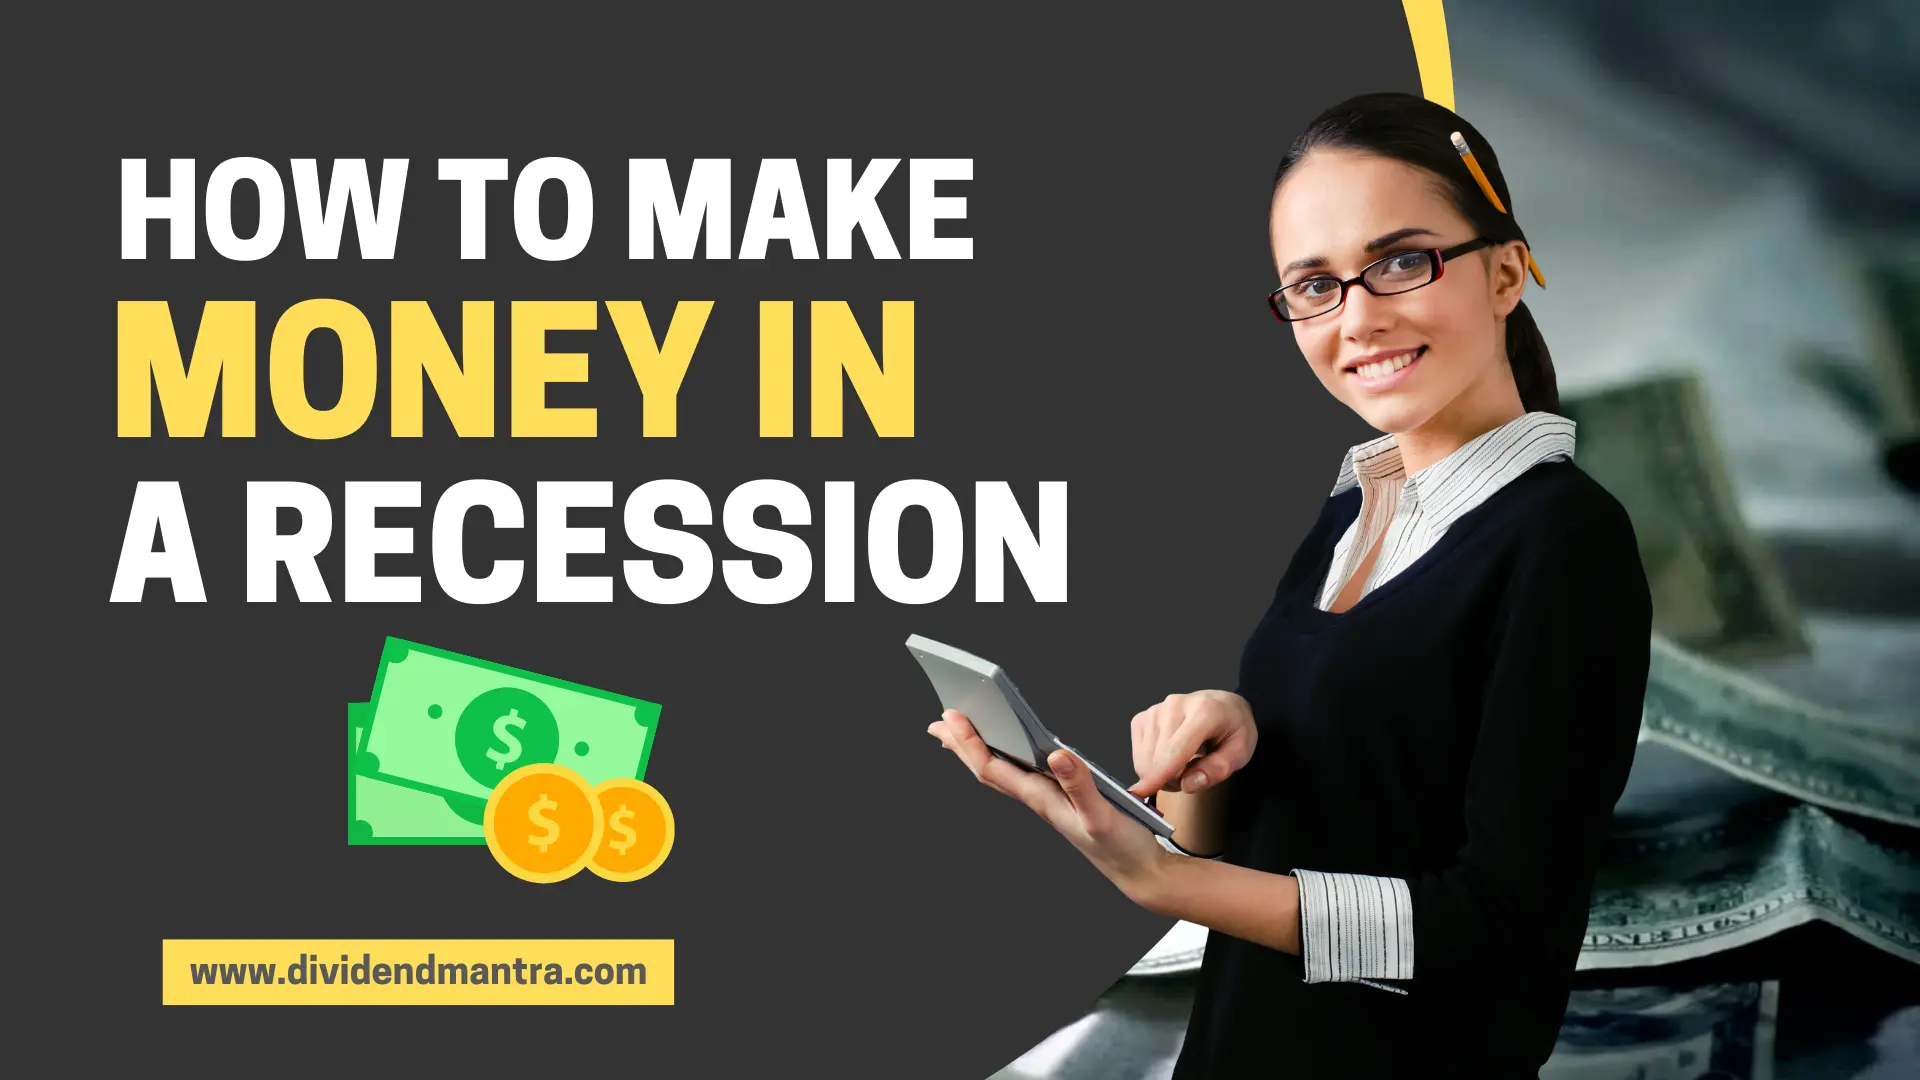 How To Make Money in a Recession